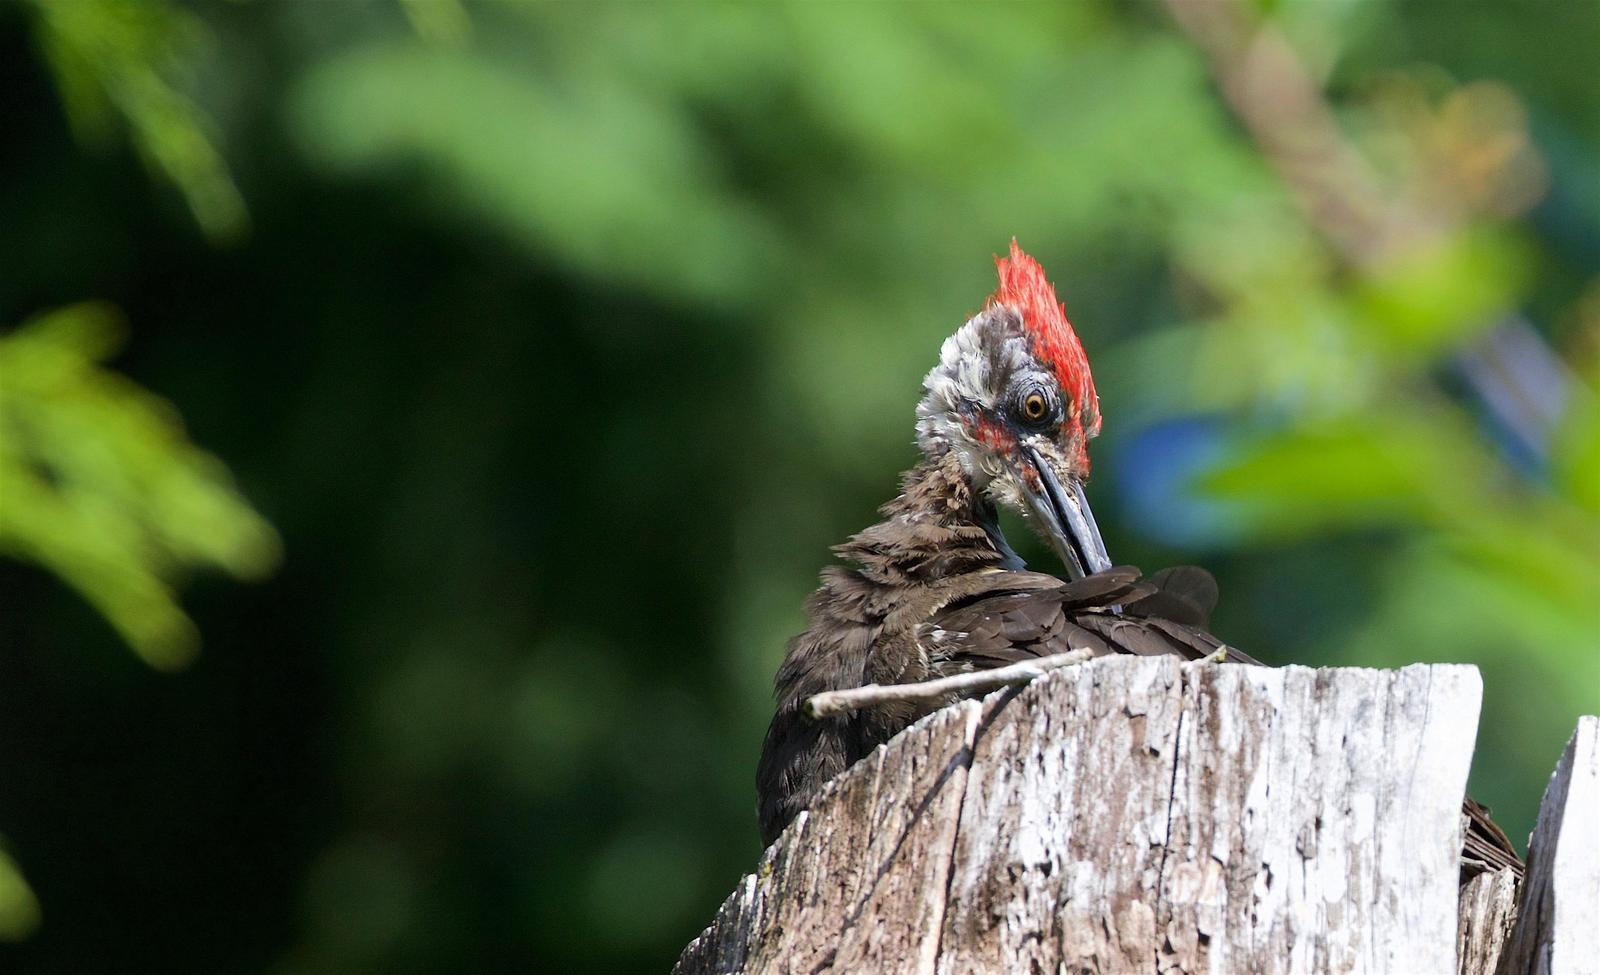 Pileated Woodpecker Photo by Kathryn Keith